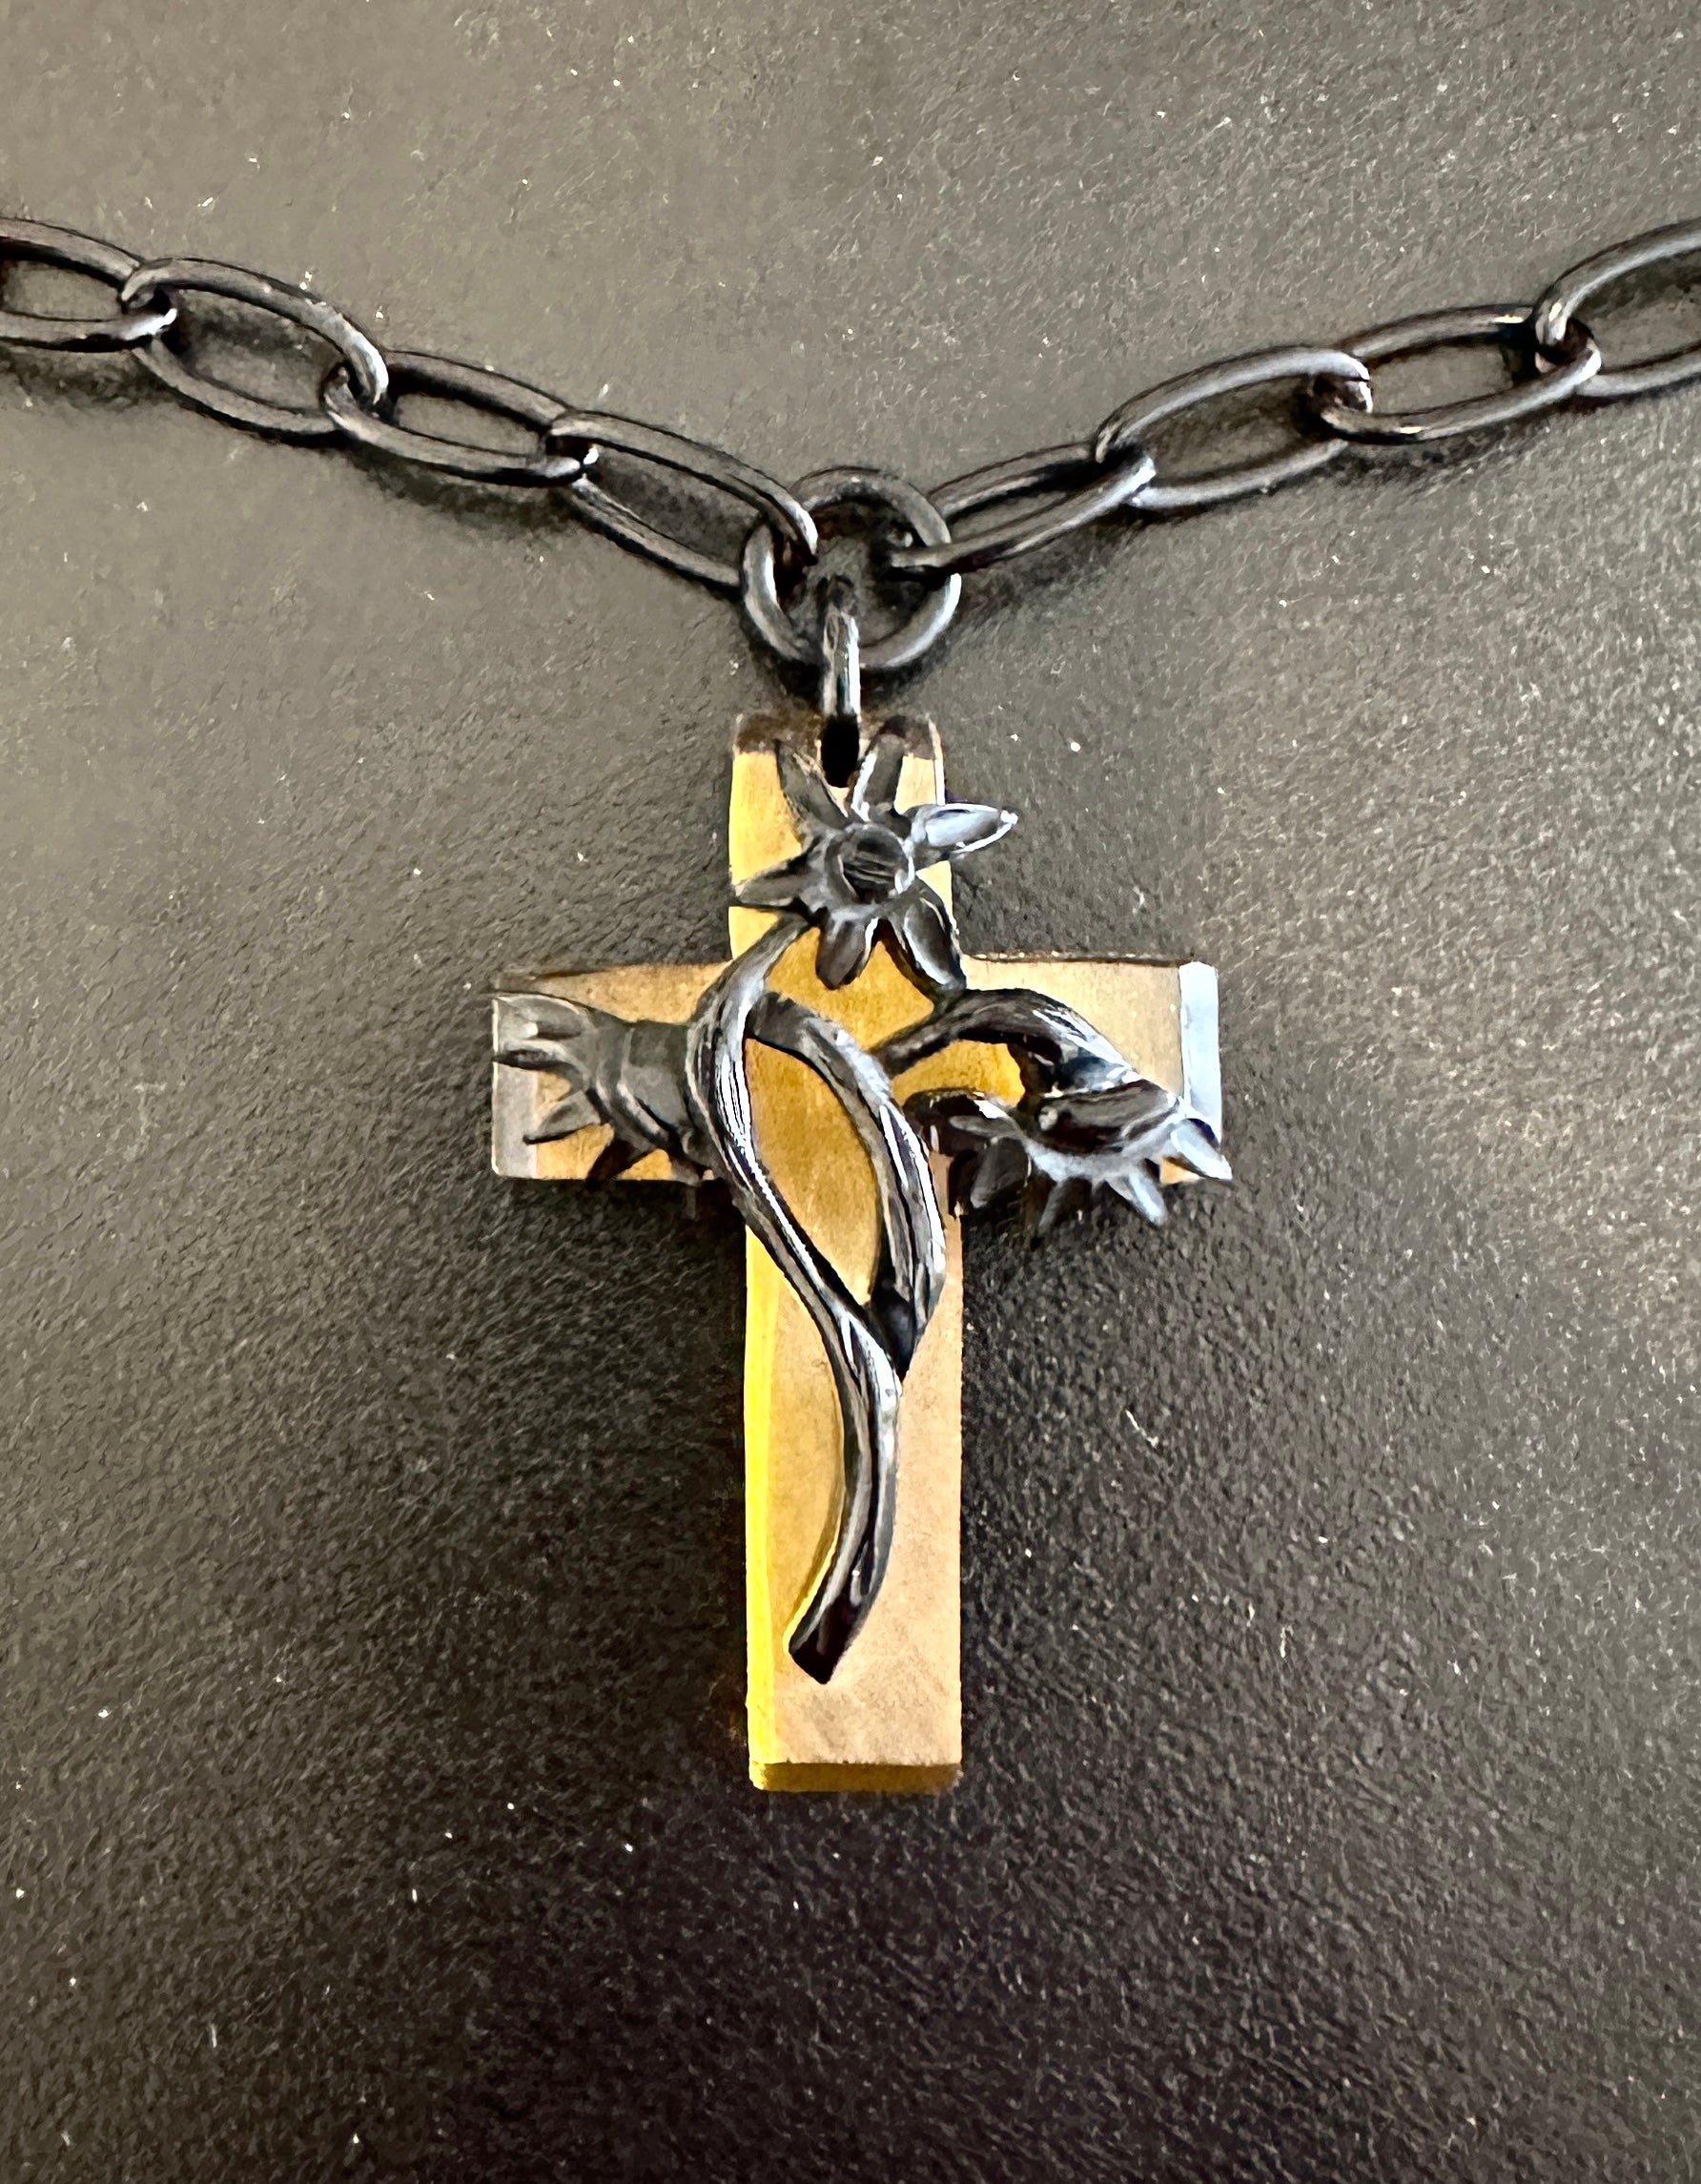 Indulge in a magnificent rare antique Art Deco Bakelite Cross Pendant Necklace.  The stunning cross is adorned with a fully three dimensional flower.  The dramatic use of the honey colored bakelite cross with the black flower is absolutely